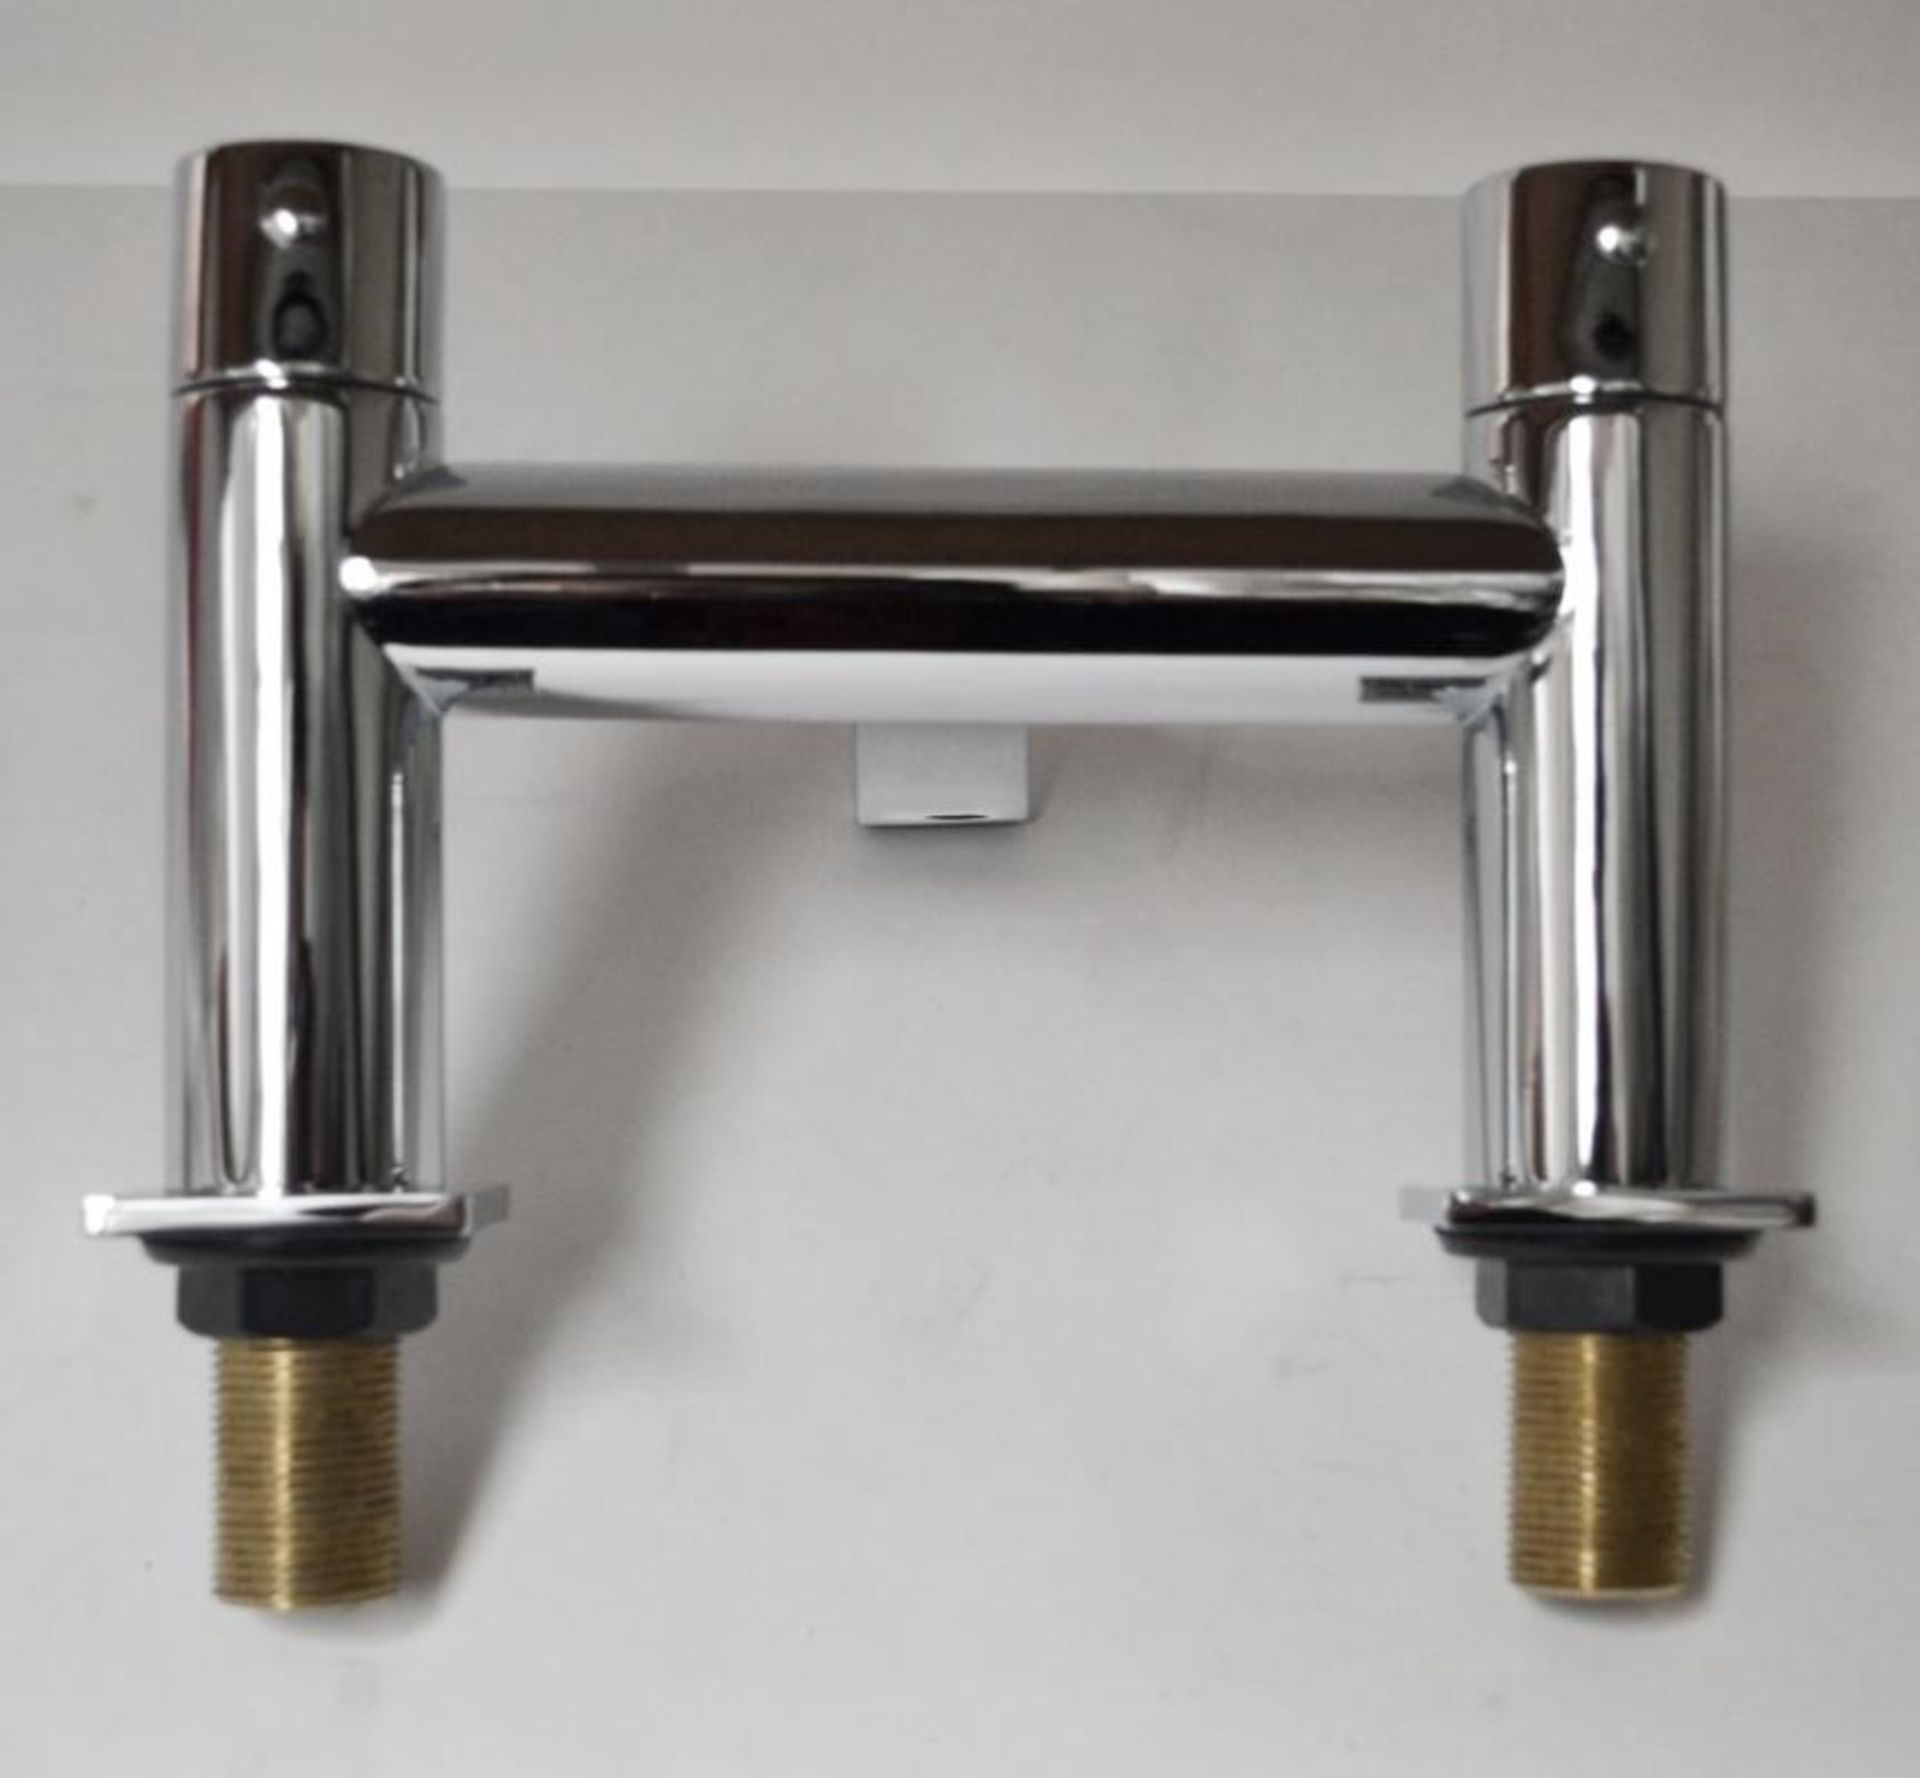 1 x Vogue Series 2 Bath Filler Taps in Chrome - Approx RRP £275! - Image 4 of 7